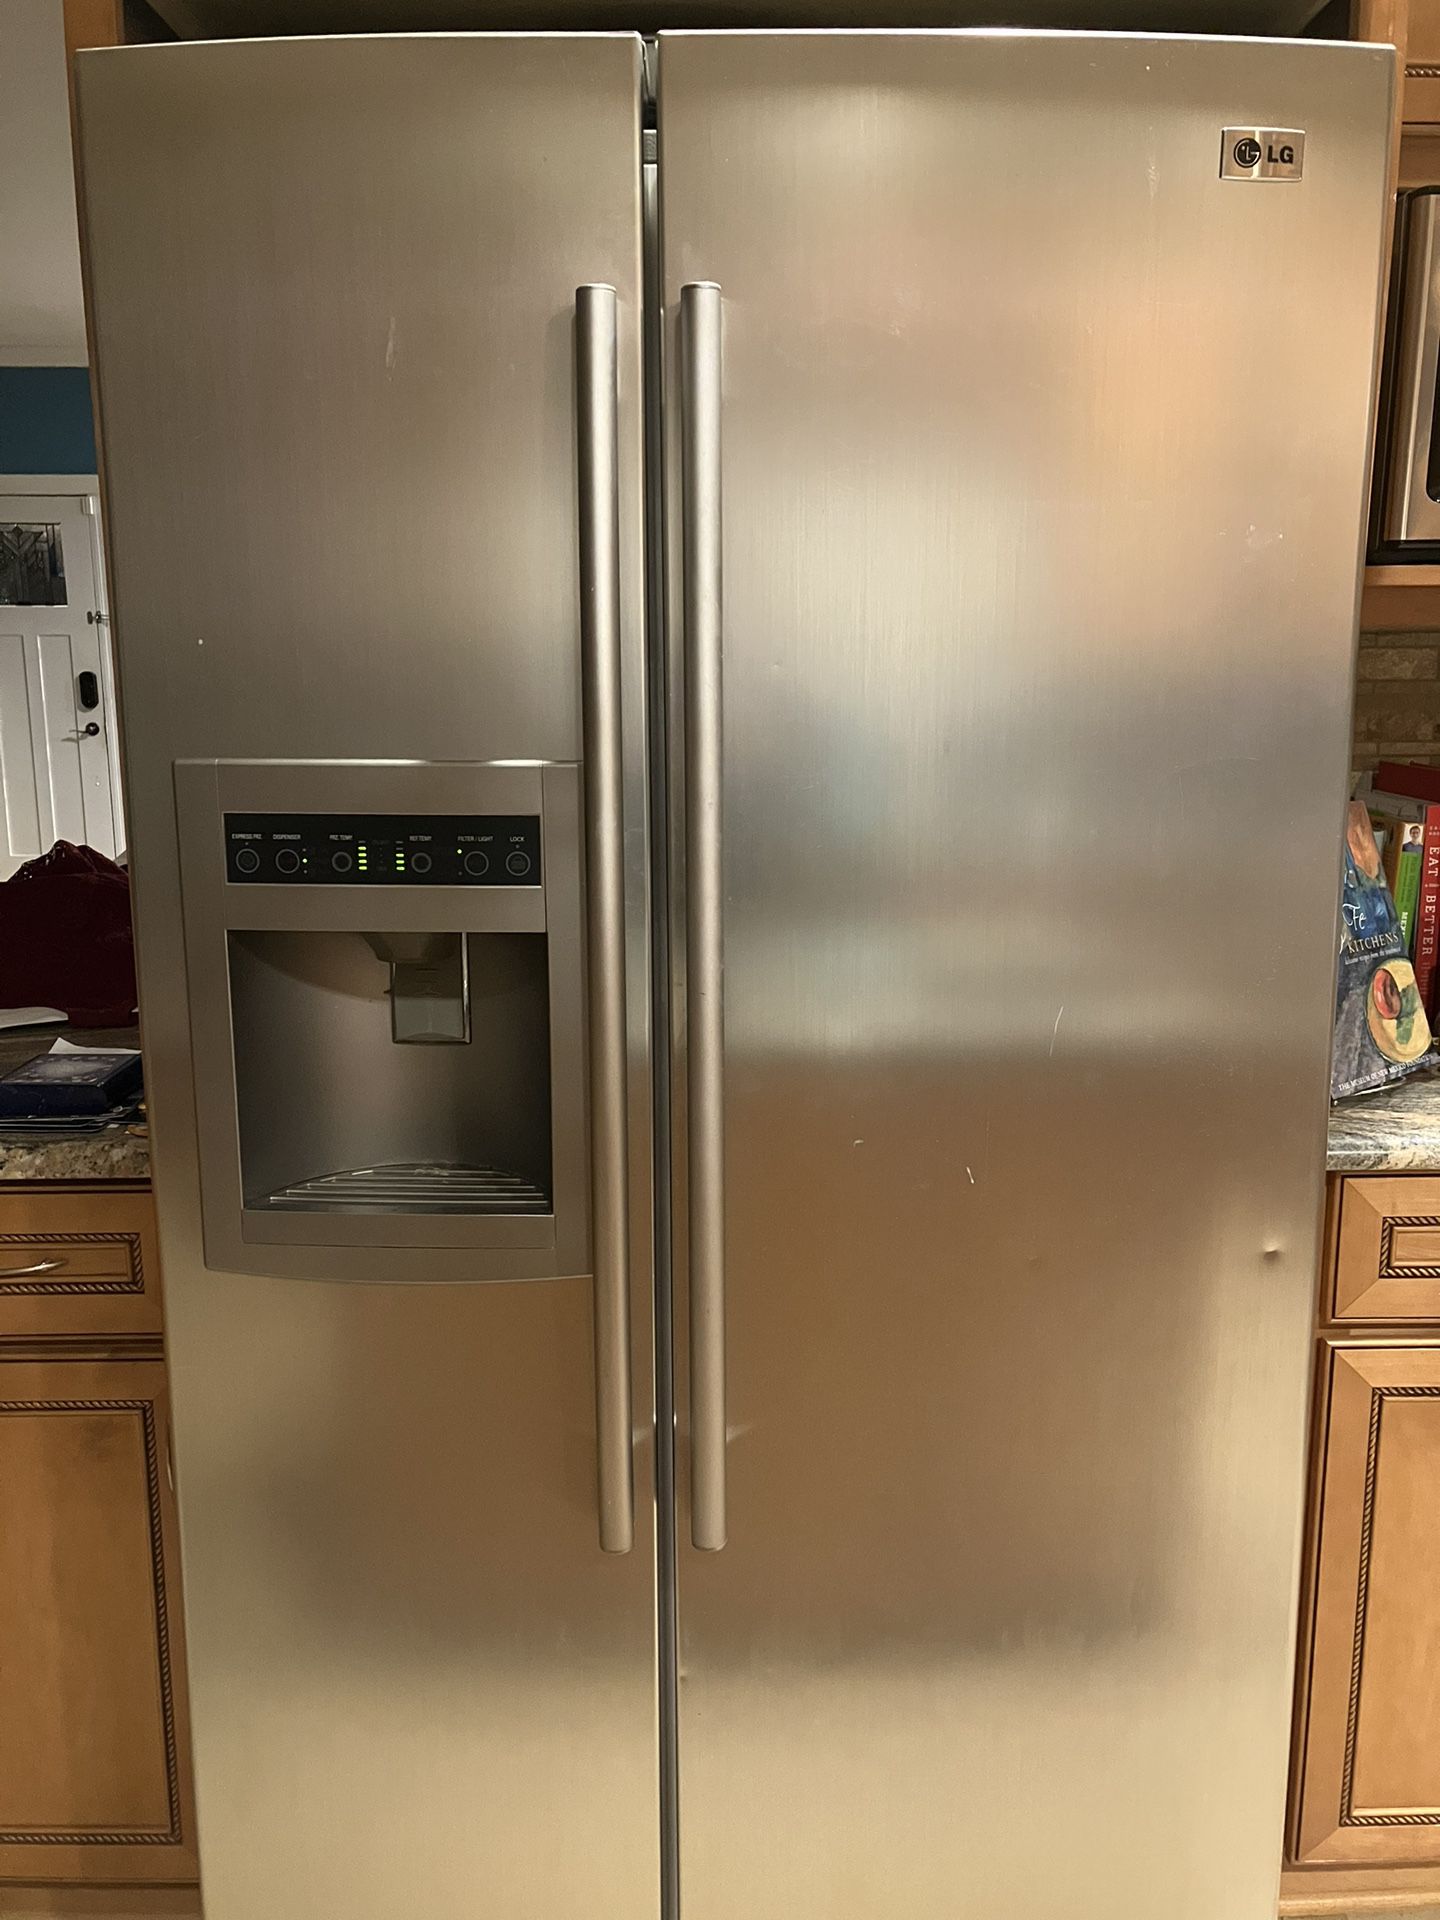 LG Stainless Steel Refrigerator/Freezer- 36” Width French Door Unit With Water Filter